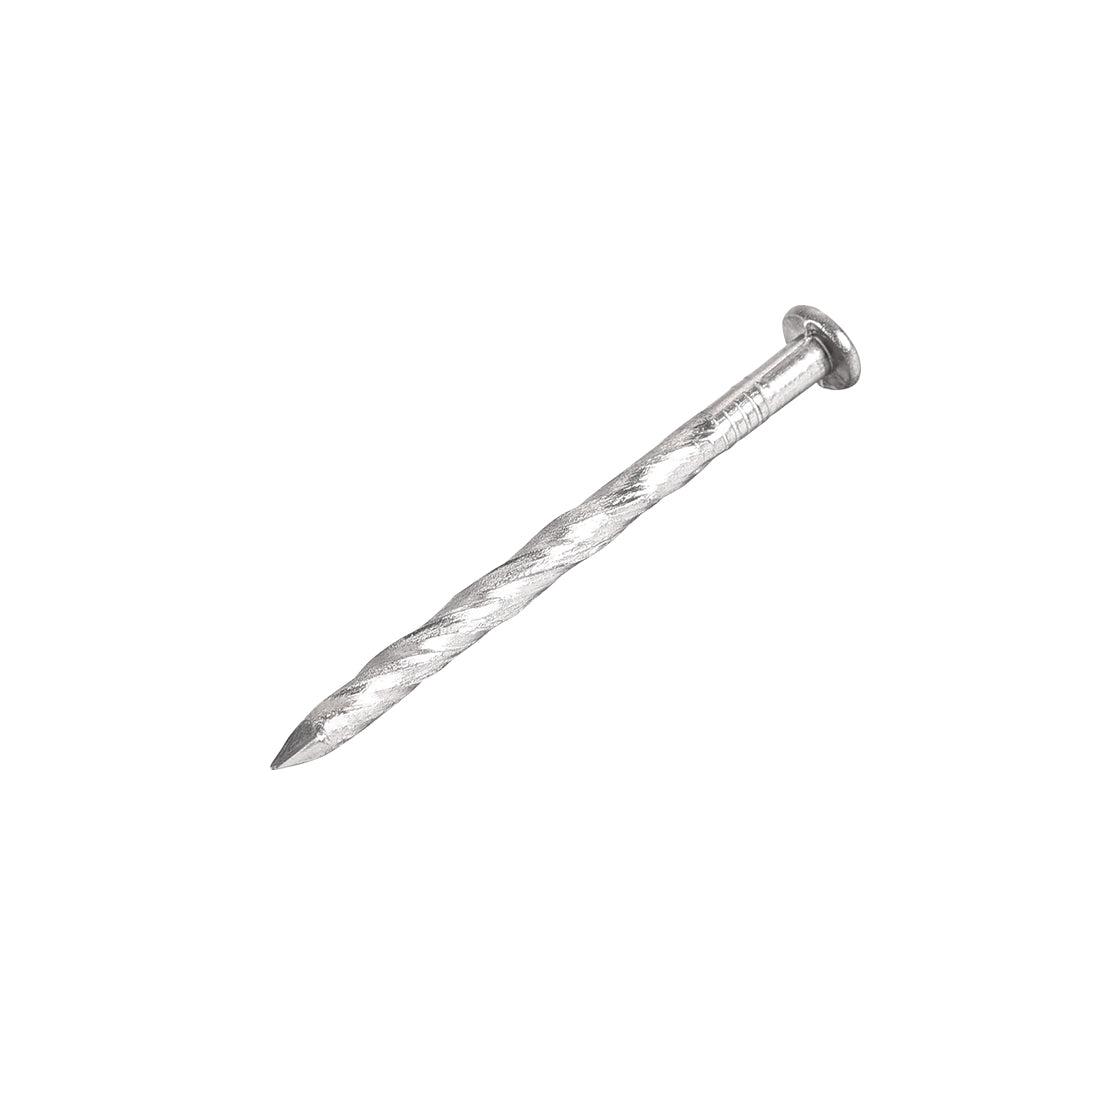 uxcell Uxcell Spiral Deck Nails Stainless Steel Nail Spiral Shank 41mmx3mm(LxD) , 200 Pcs